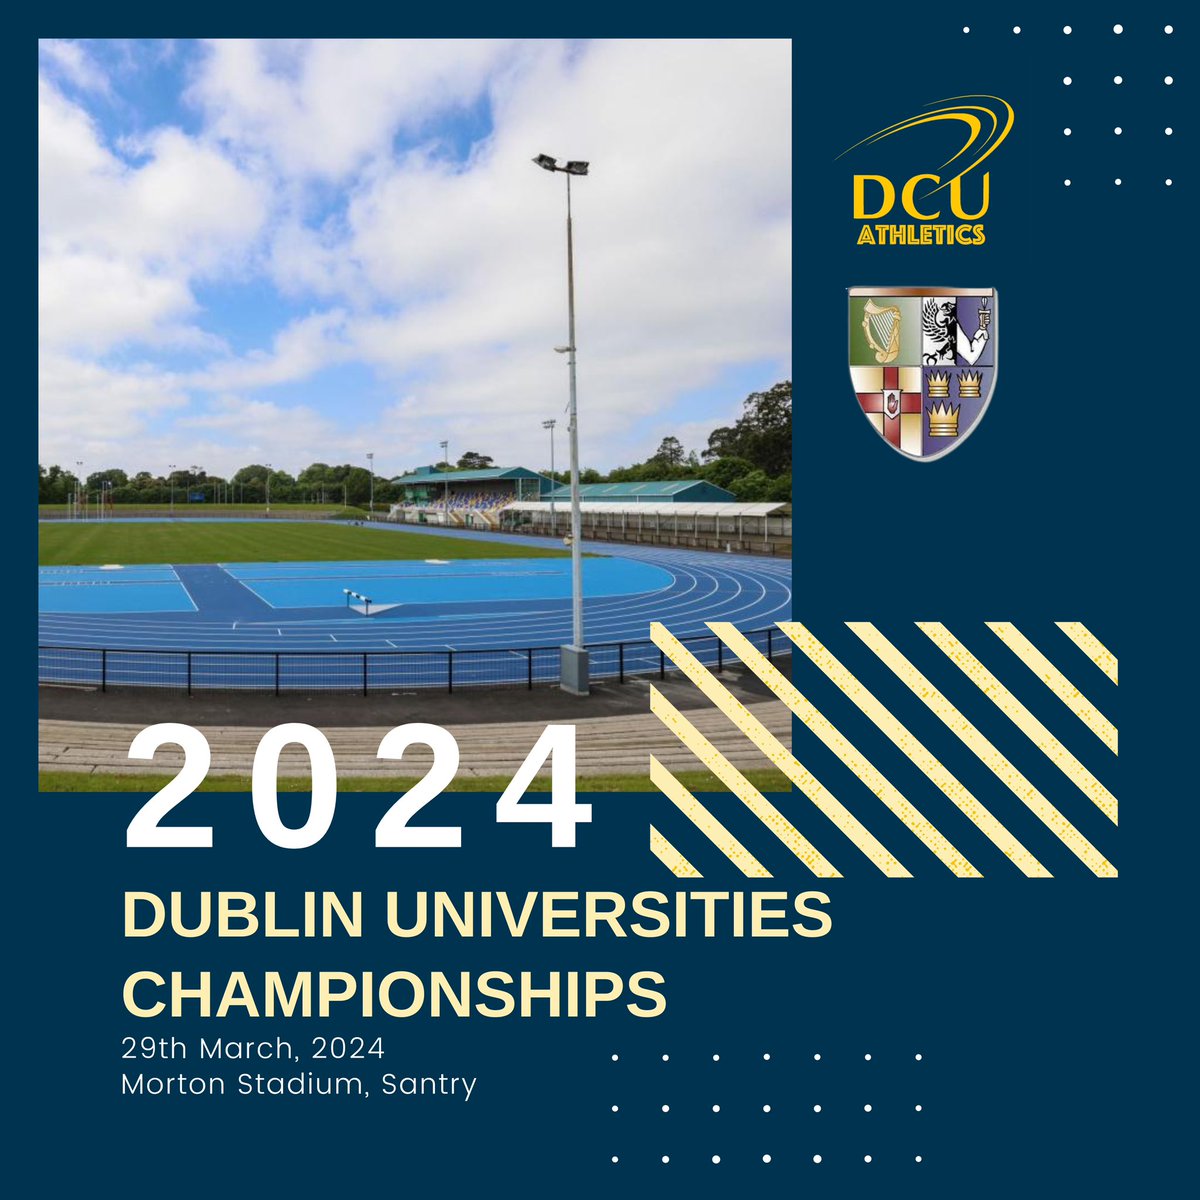 Next Up… Dublin Universities T&F Champs 🏃‍♀️🏃‍♂️ We’re delighted to be hosting the FIRST EVER Dublin Universities Champs tomorrow on home ground in Morton Stadium Match format against @DUHAC_TCD @UCDAC_bears @MUSportsOffice @TUDublinSportCC